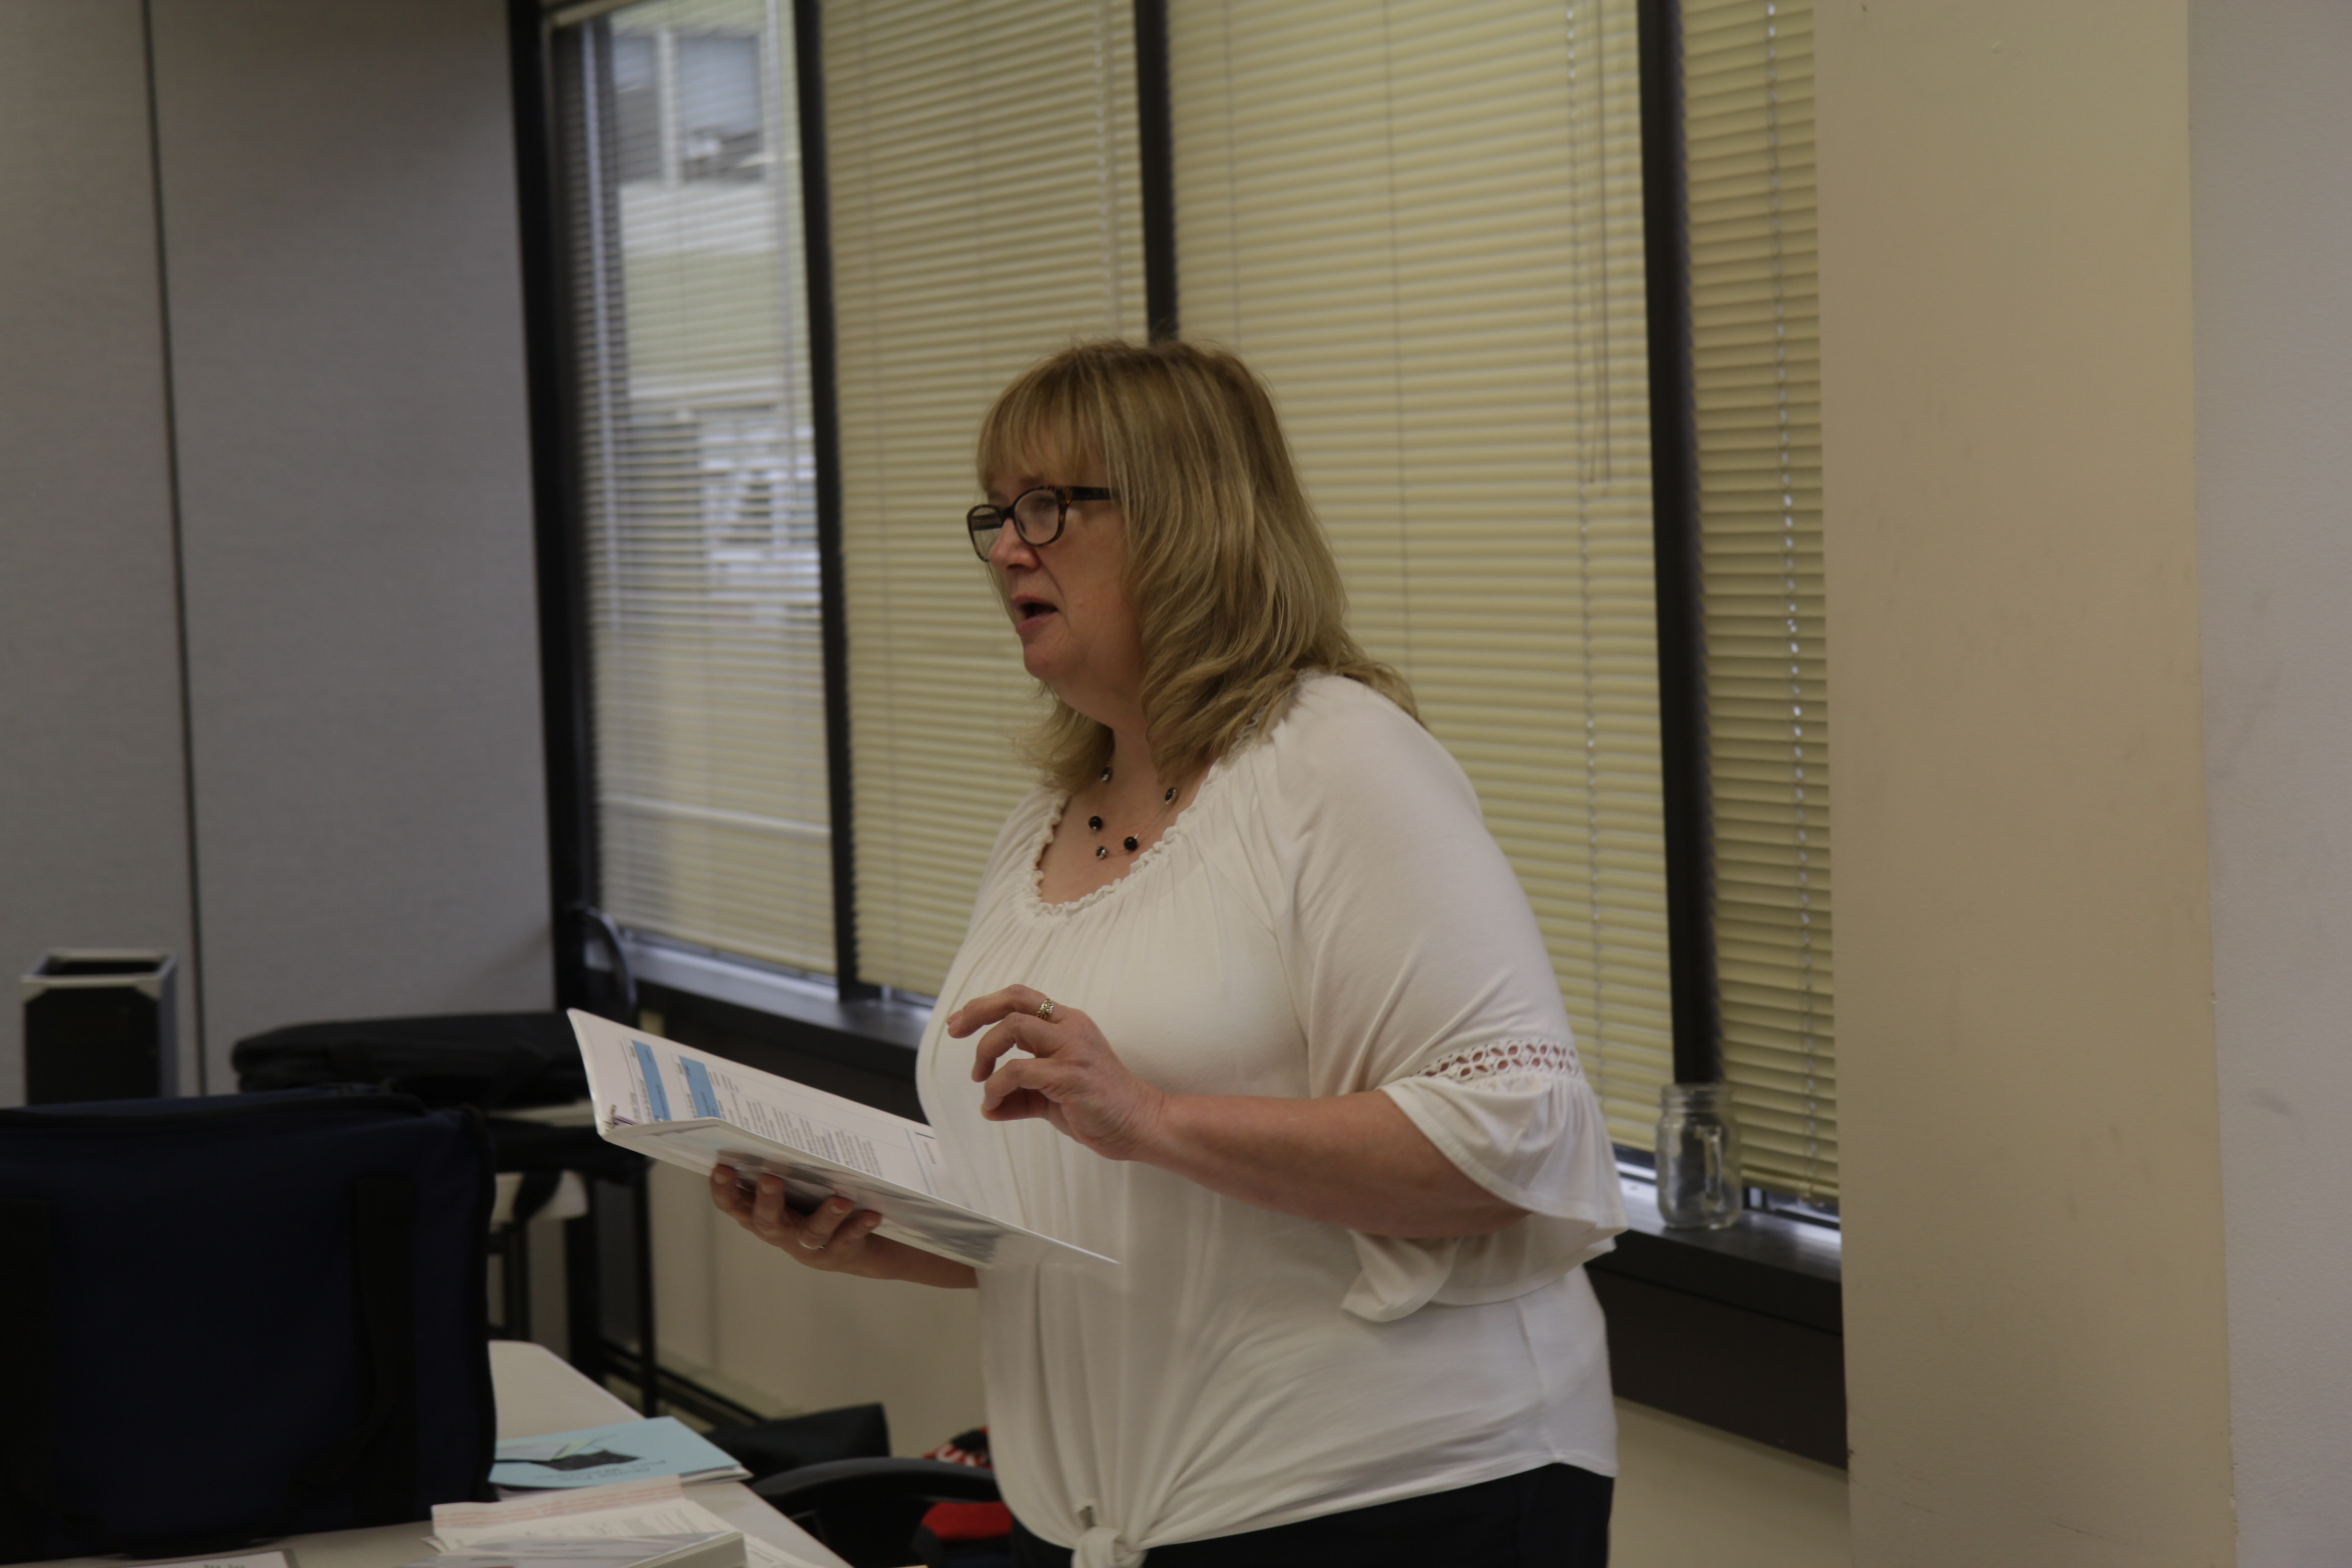 Julie Husmann with the Division of Elections teaches volunteer poll workers at a three-hour training in Anchorage. (Photo by Wesley Early/Alaska Public Media)